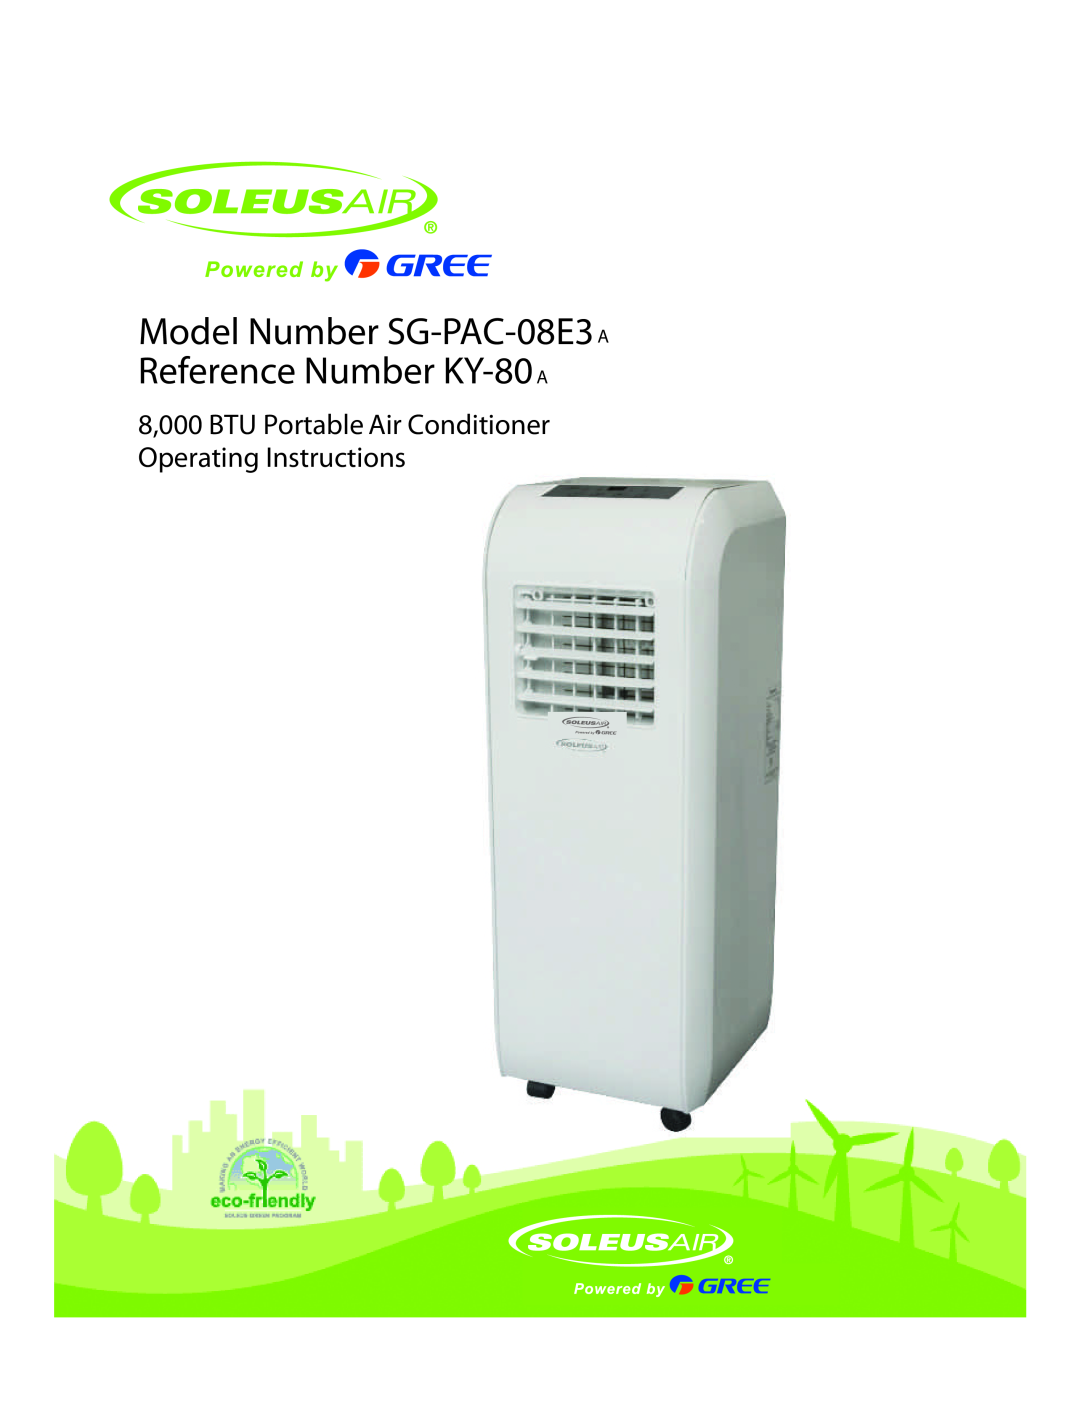 Soleus Air manual Model Number SG-PAC-08E3A Reference Number KY-80A, 8,000 BTU Portable Air Conditioner 